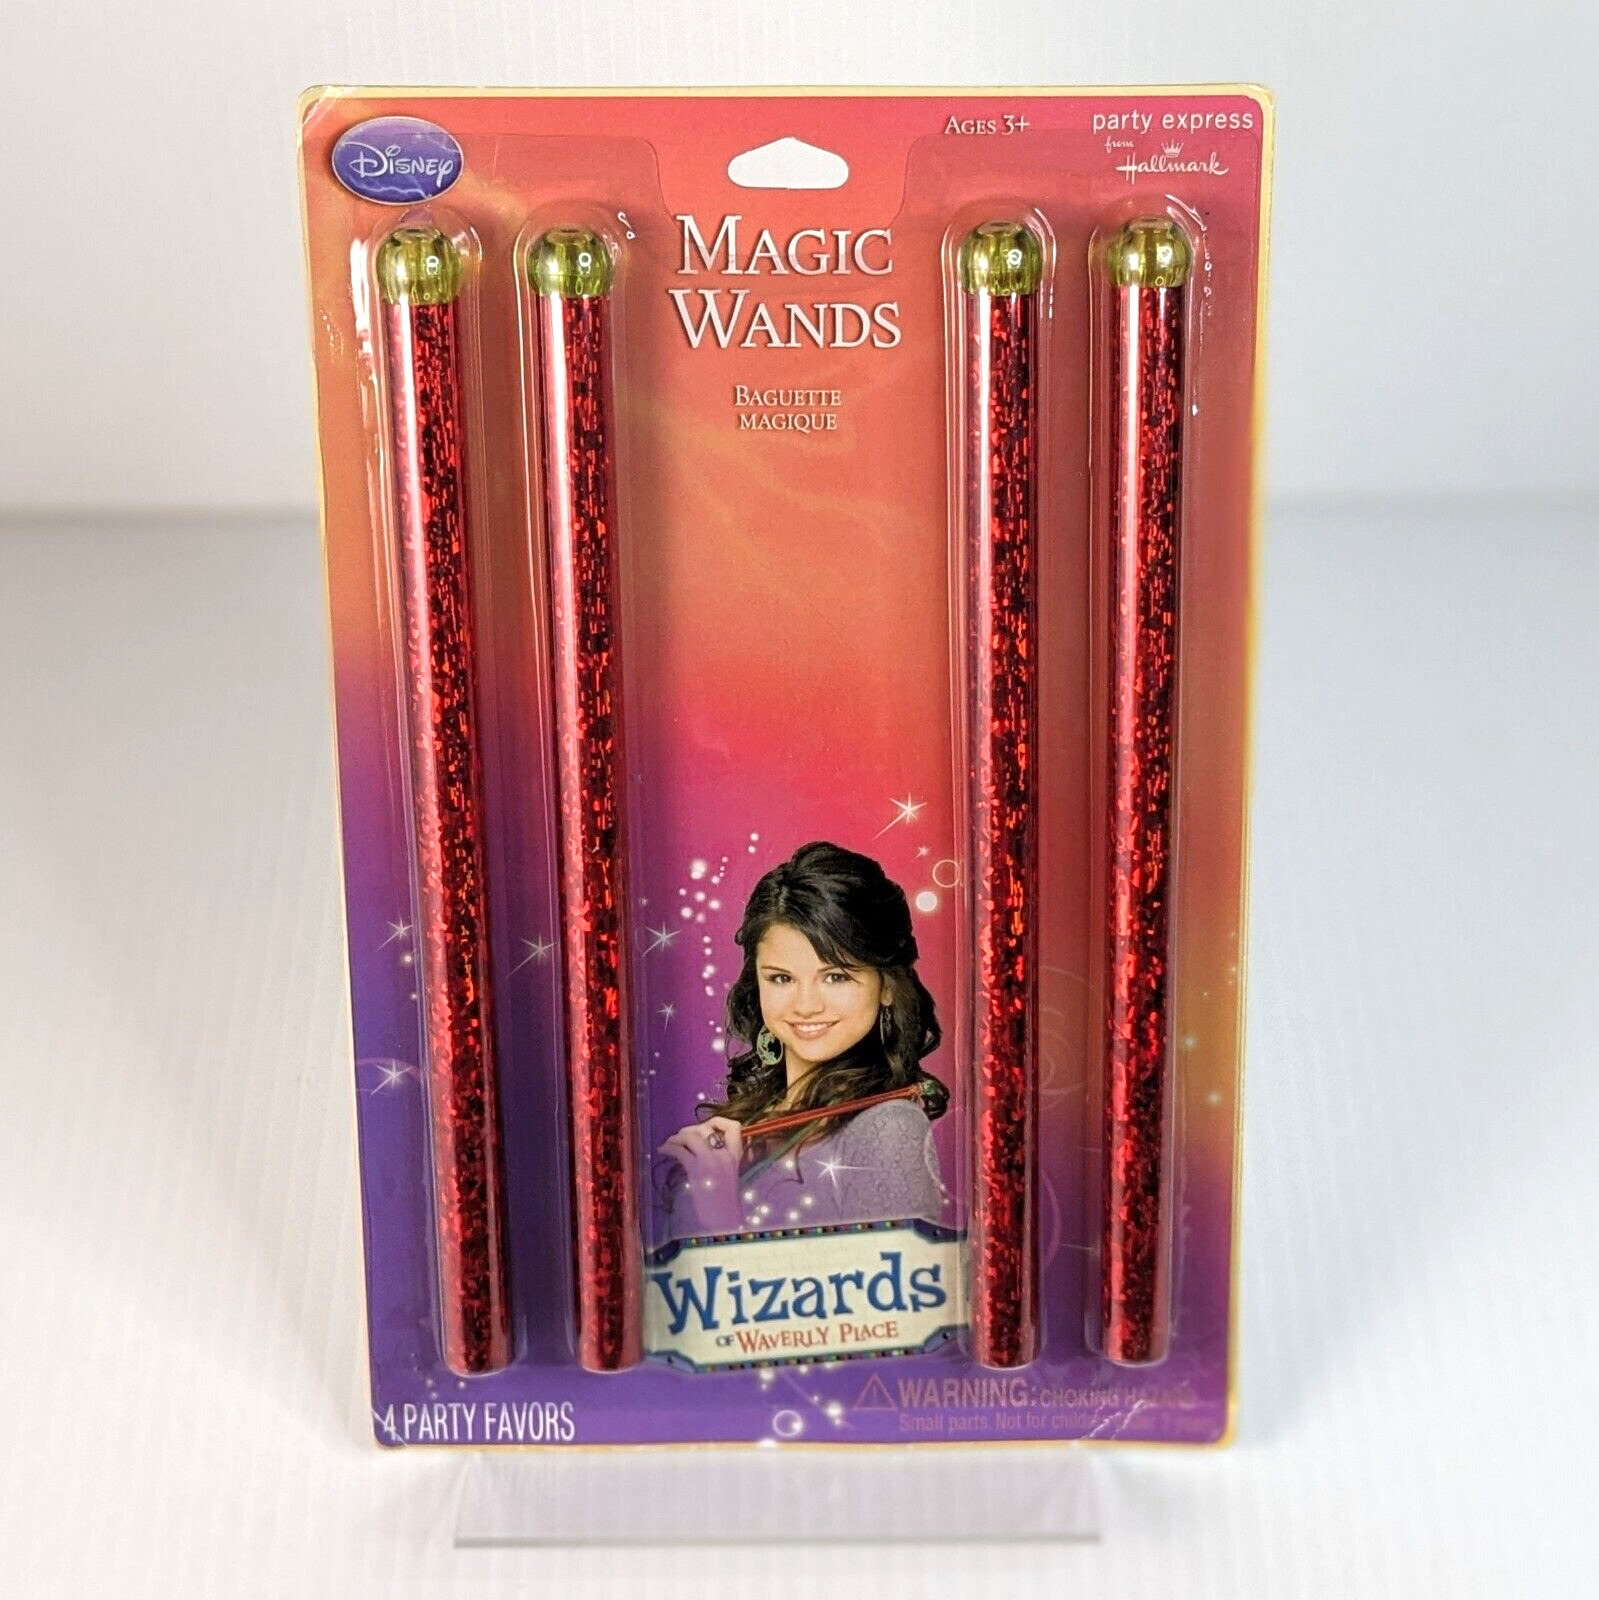 Vintage Disney Wizards of Waverly Place Magic Wands PACK Of 4 RARE NOS